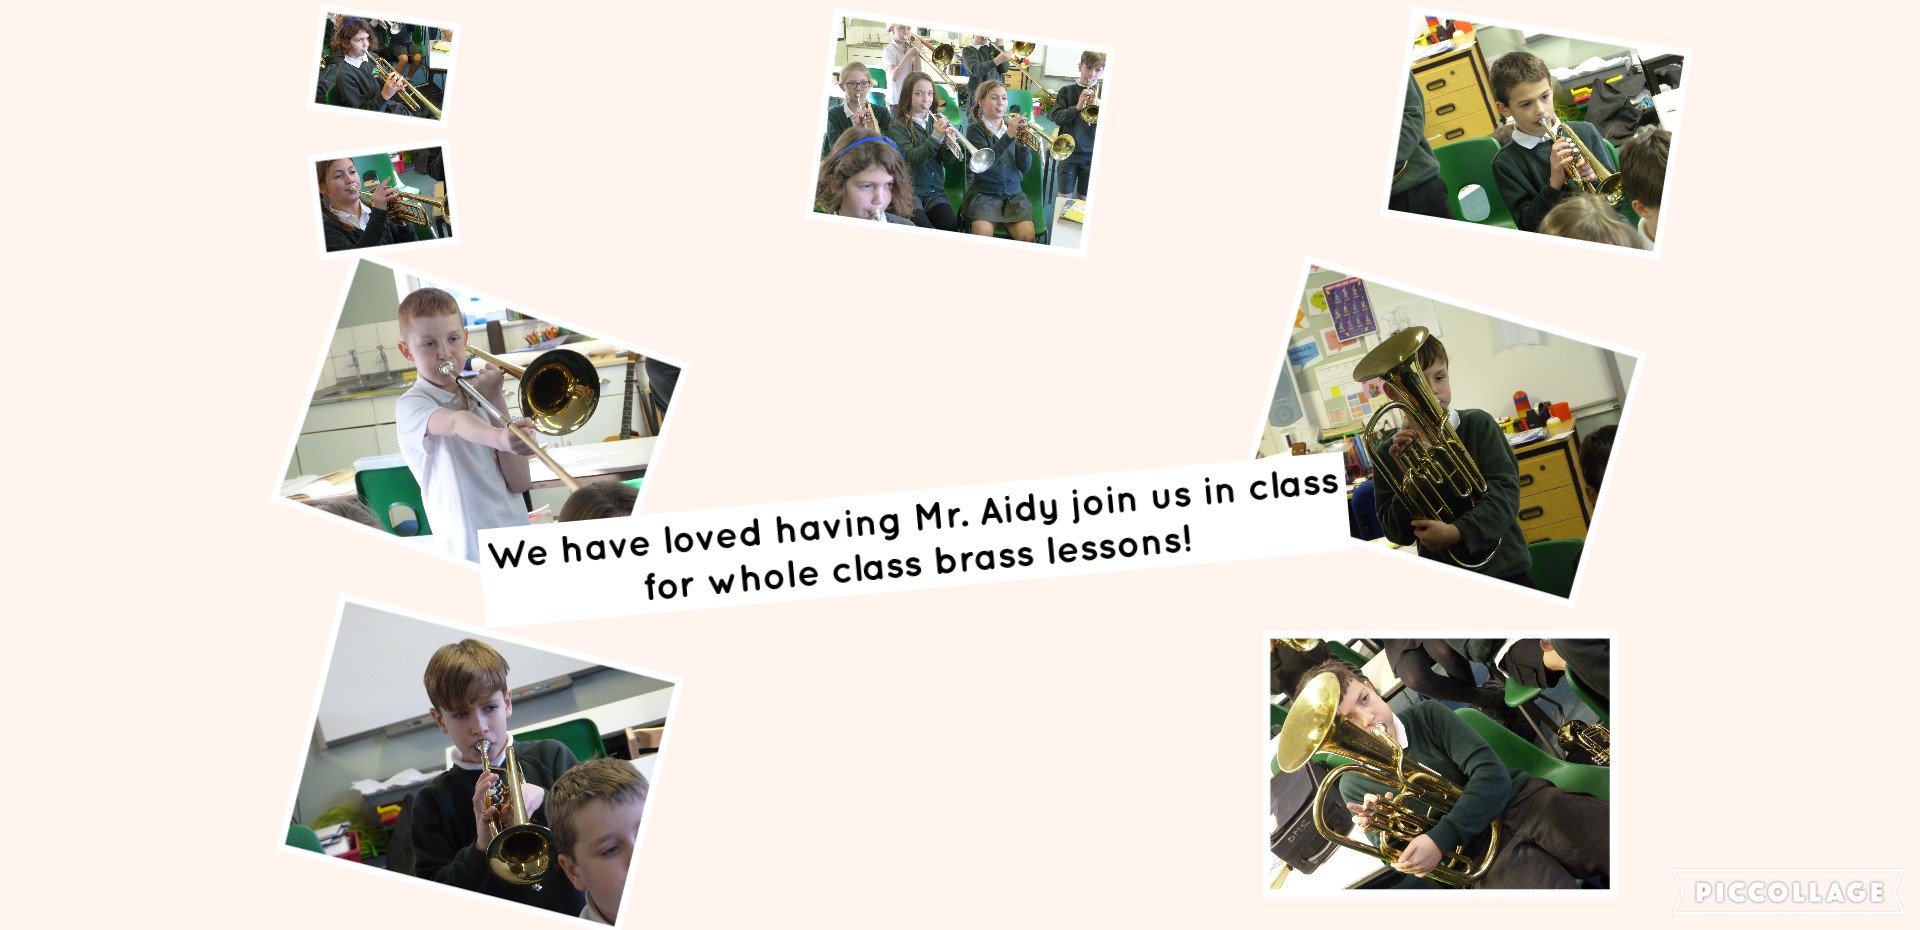 Whole Cass Brass Lessons